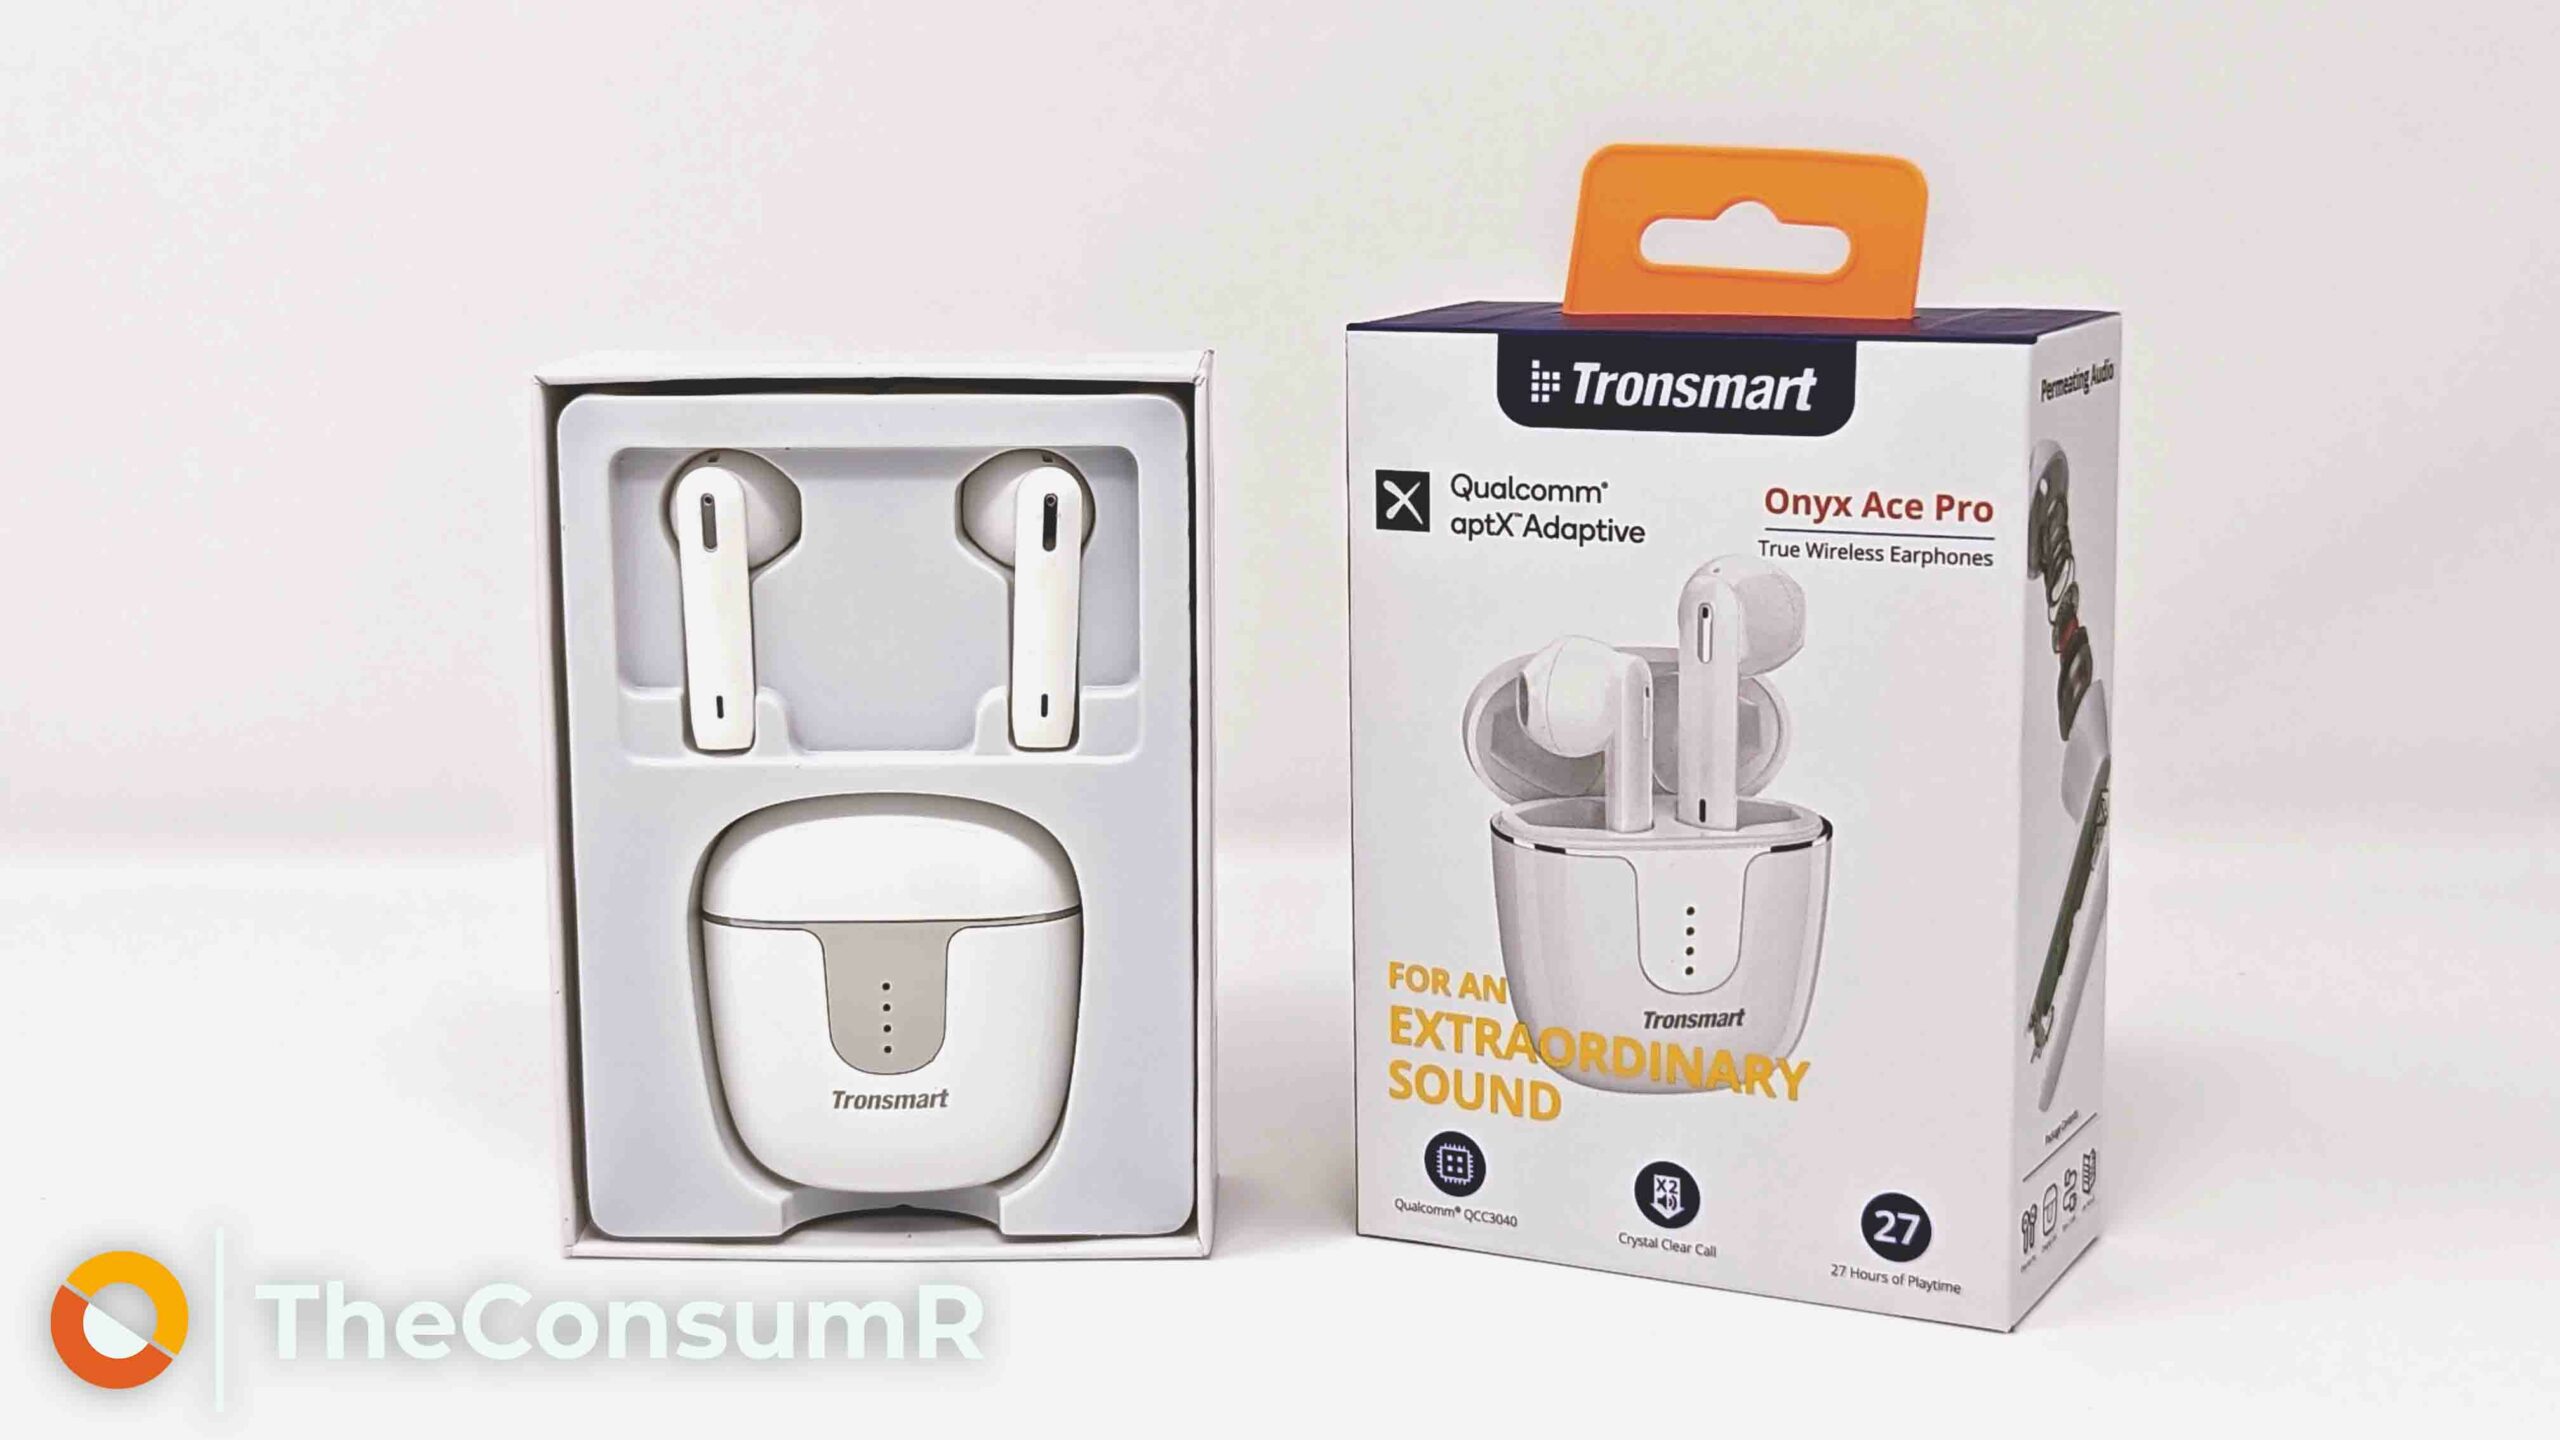 Tronsmart Onyx Ace Pro Earbuds in box on white background